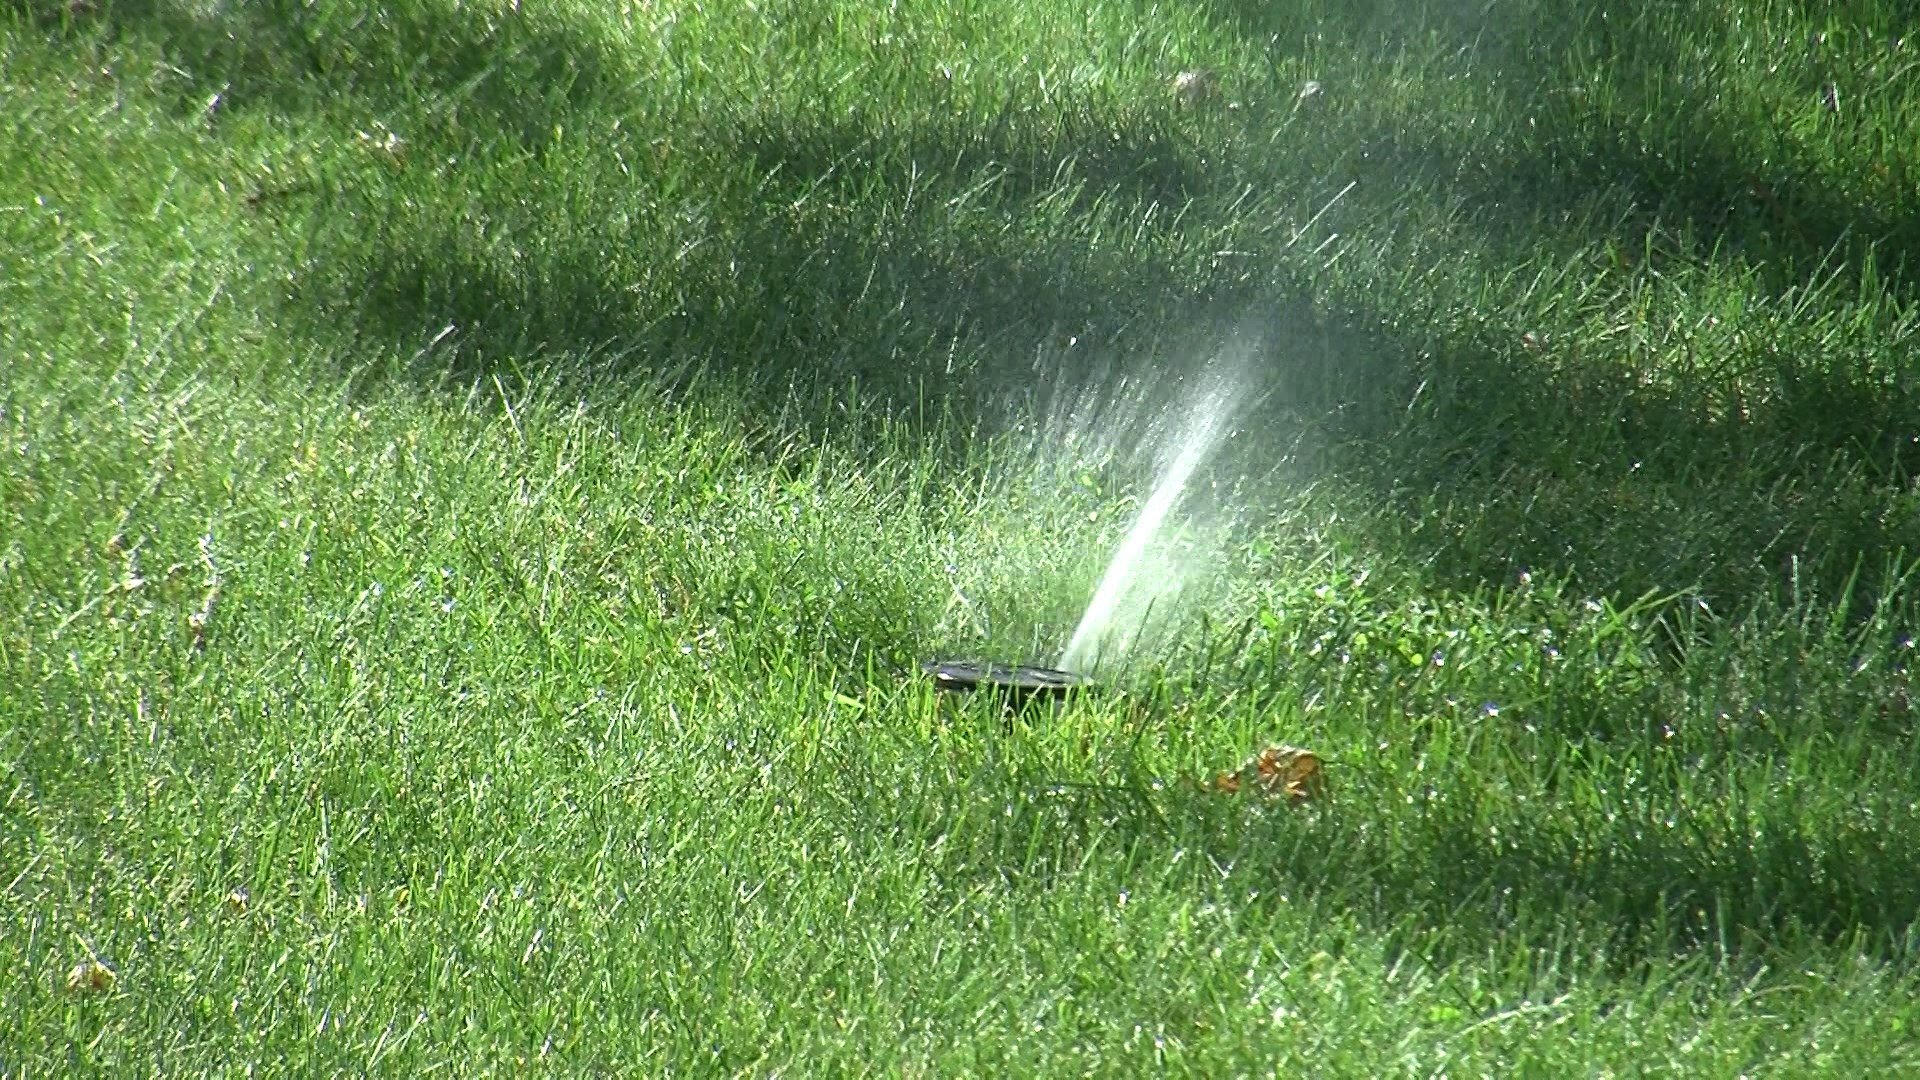 How to treat your lawn during heat wave